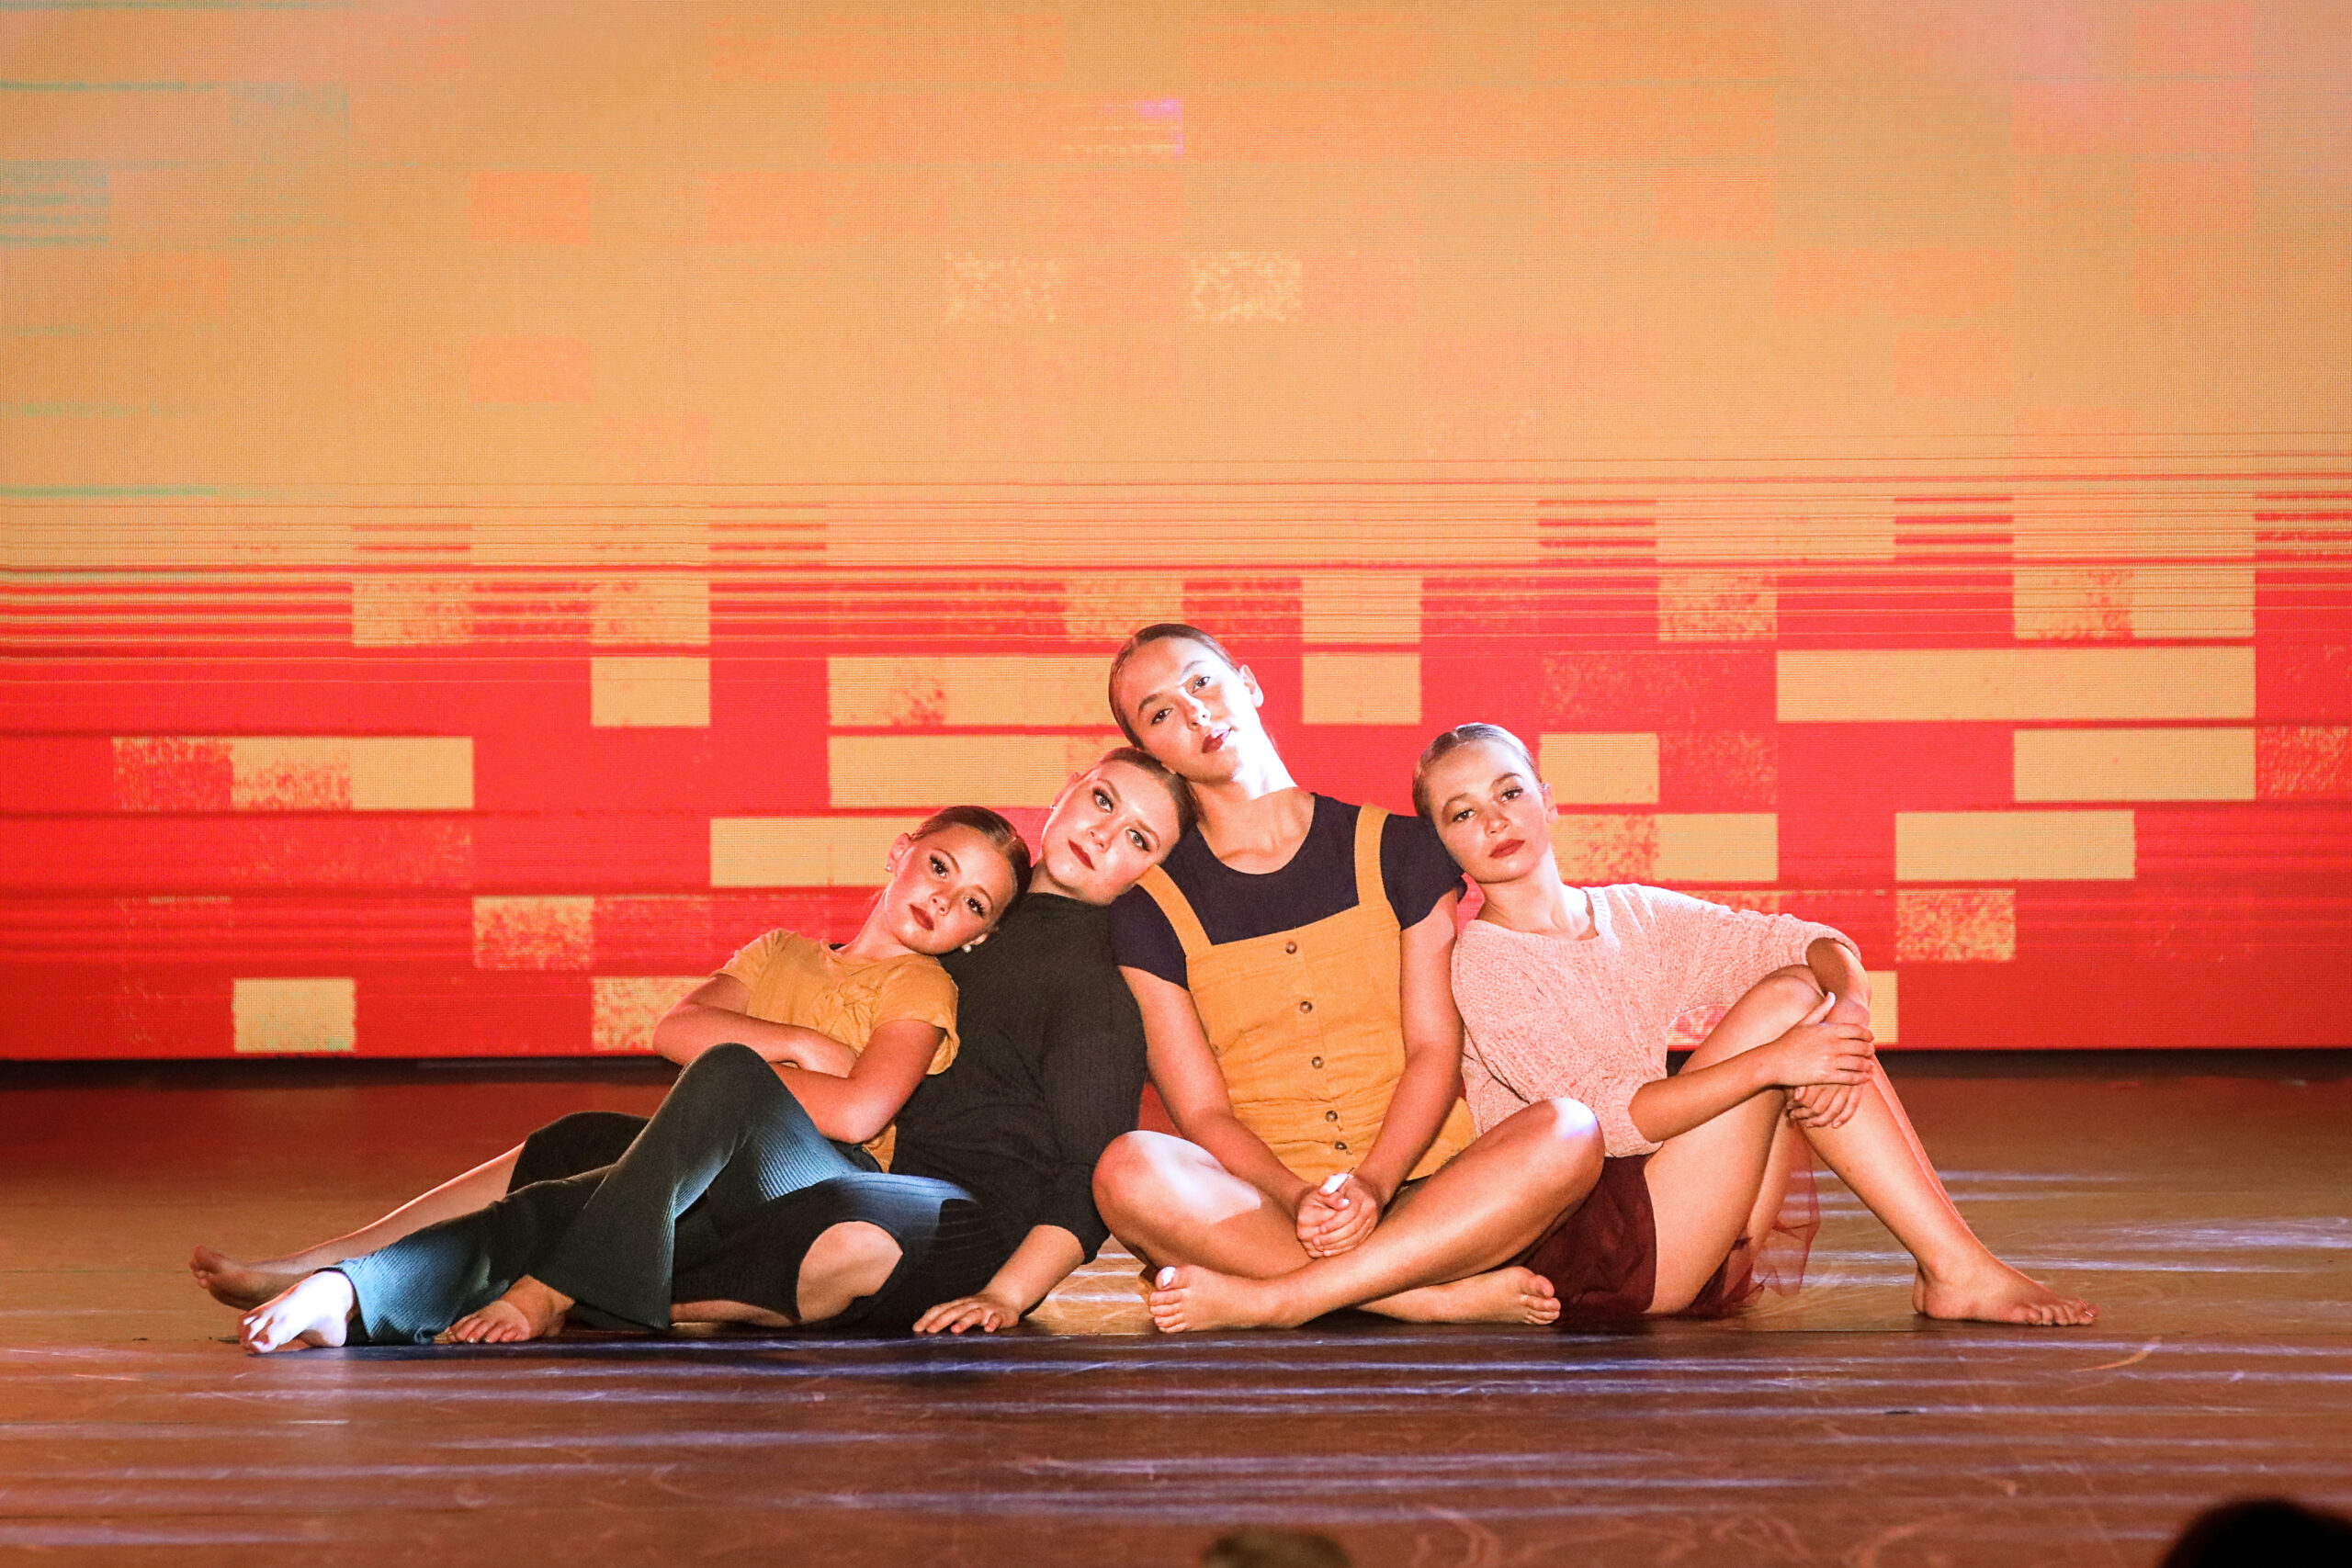 4 dancers sitting on the floor leaning against each other